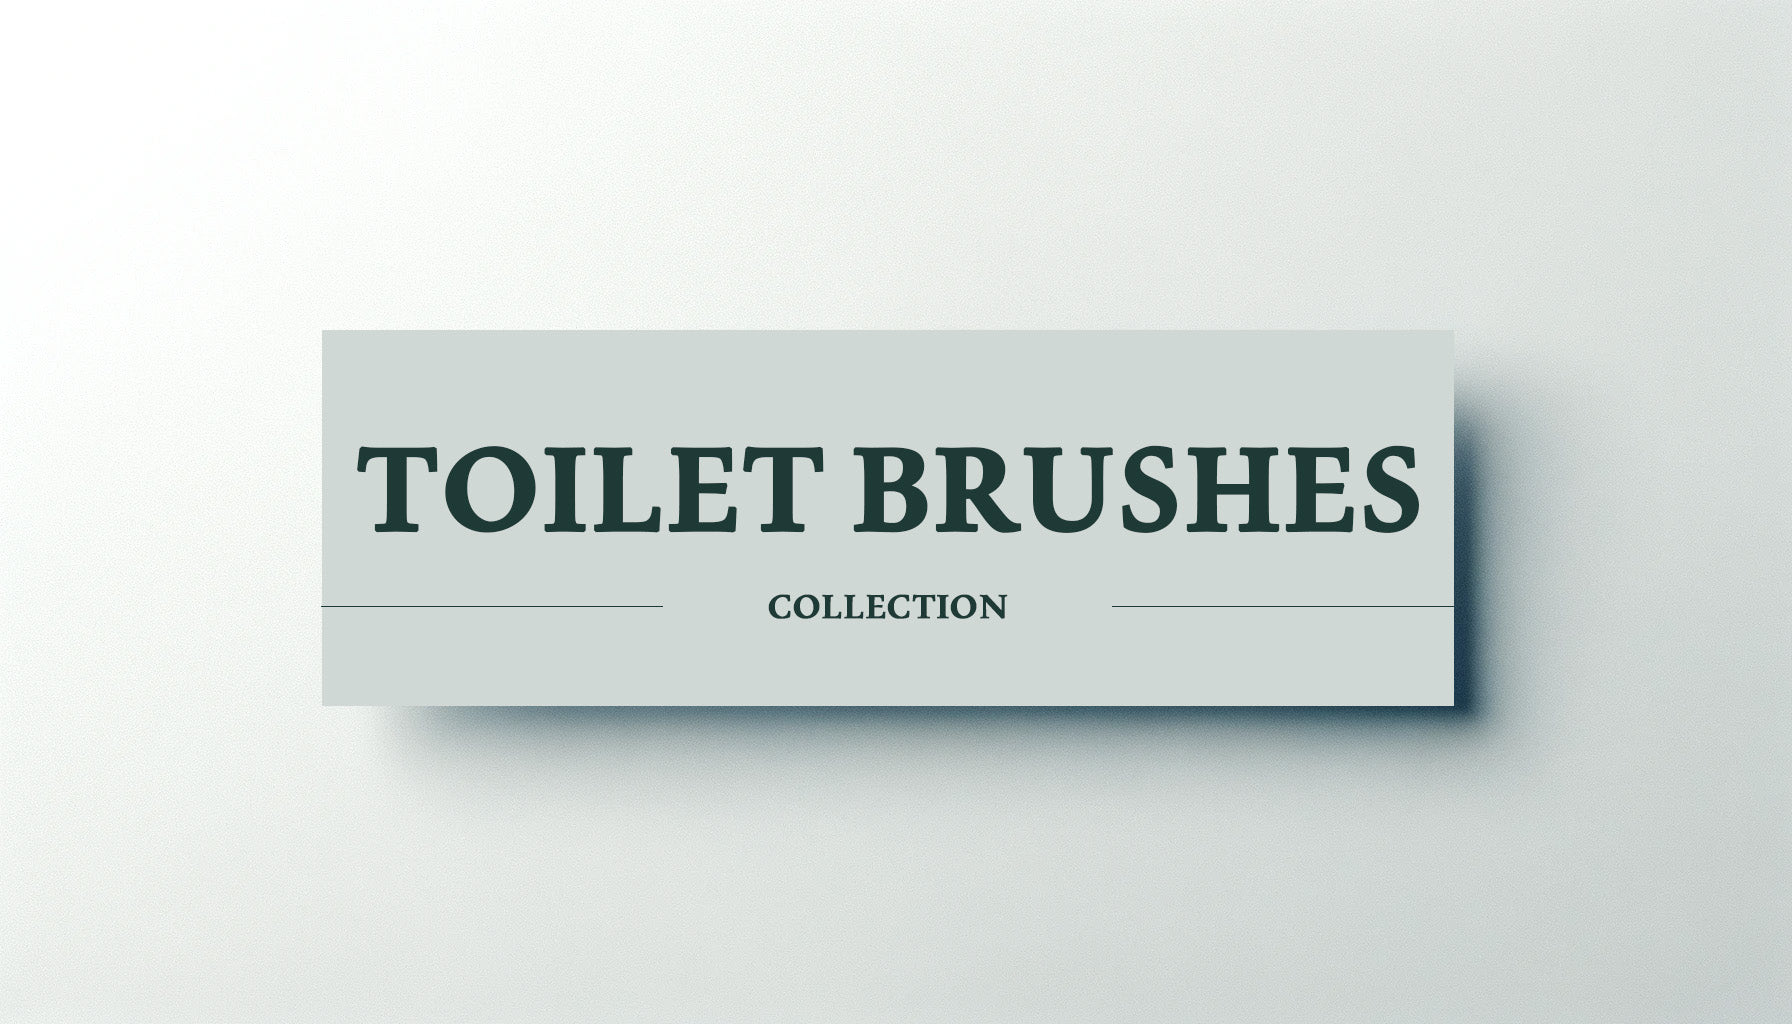 Upgrade your bathroom cleaning with our collection of Toilet Brushes. Designed for superior hygiene and performance, our brushes ensure a sparkling clean toilet every time